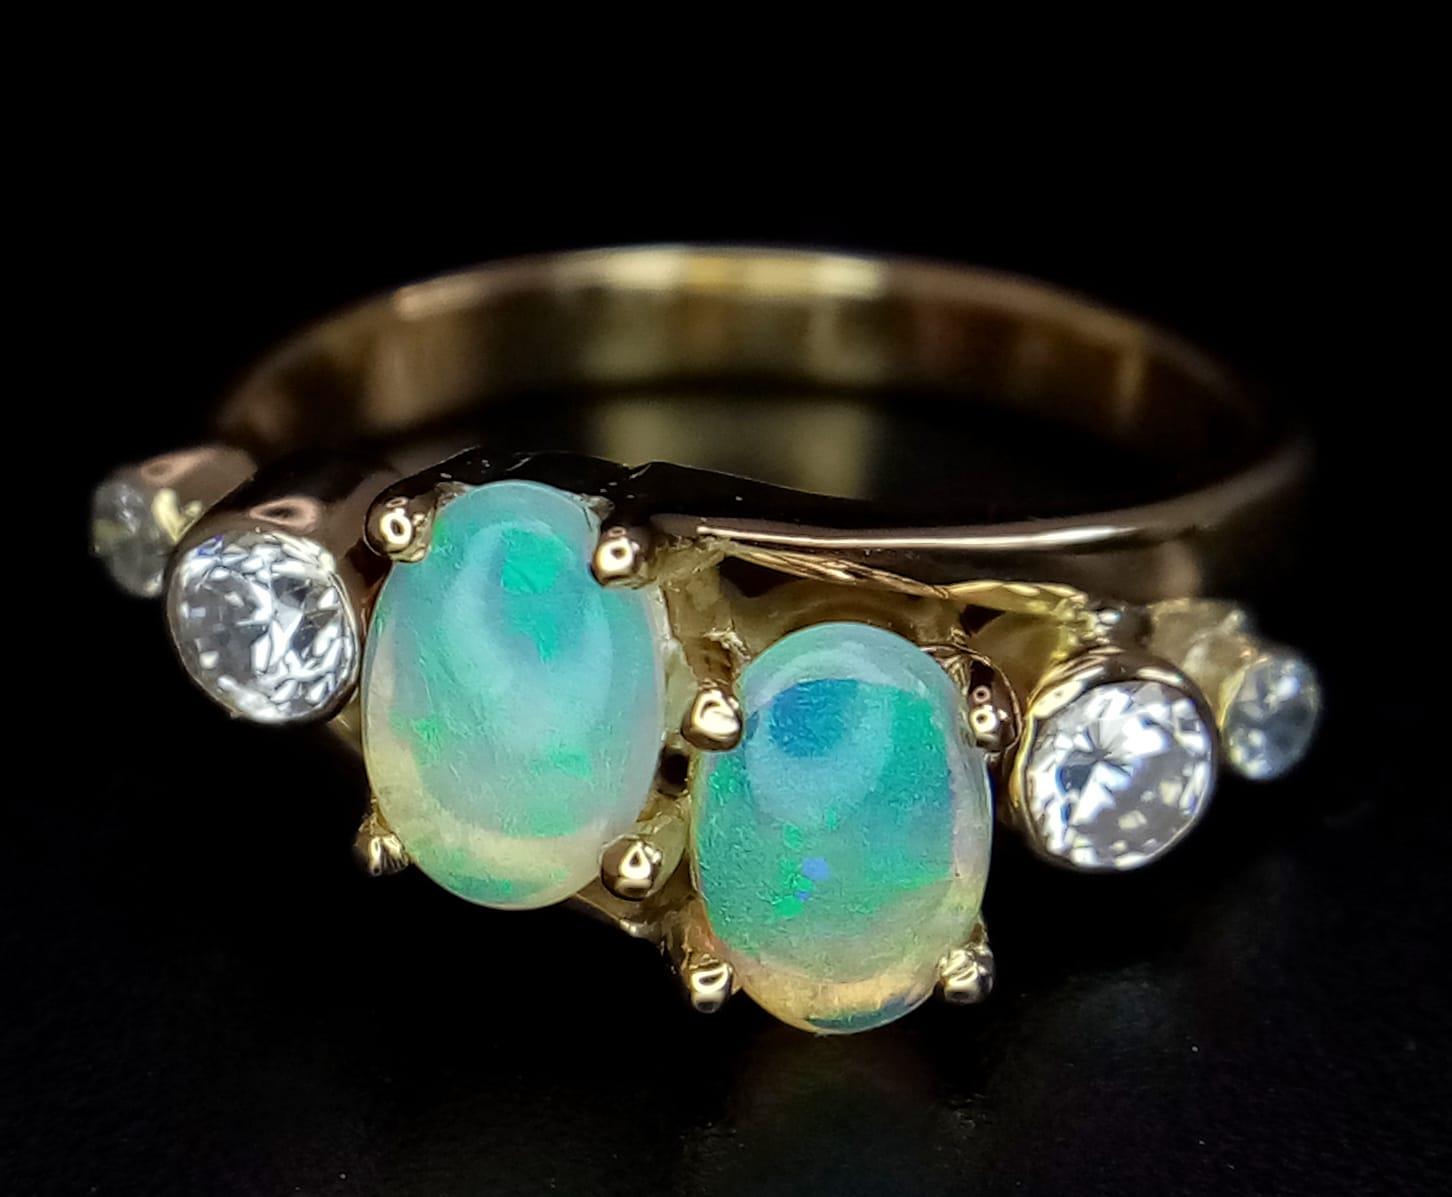 A STYLISH 18K YELLOW GOLD OPAL SET CROSSOVER RING, SET WITH 2 OPALS CENTRE AND FLANKED BY 2 CZ